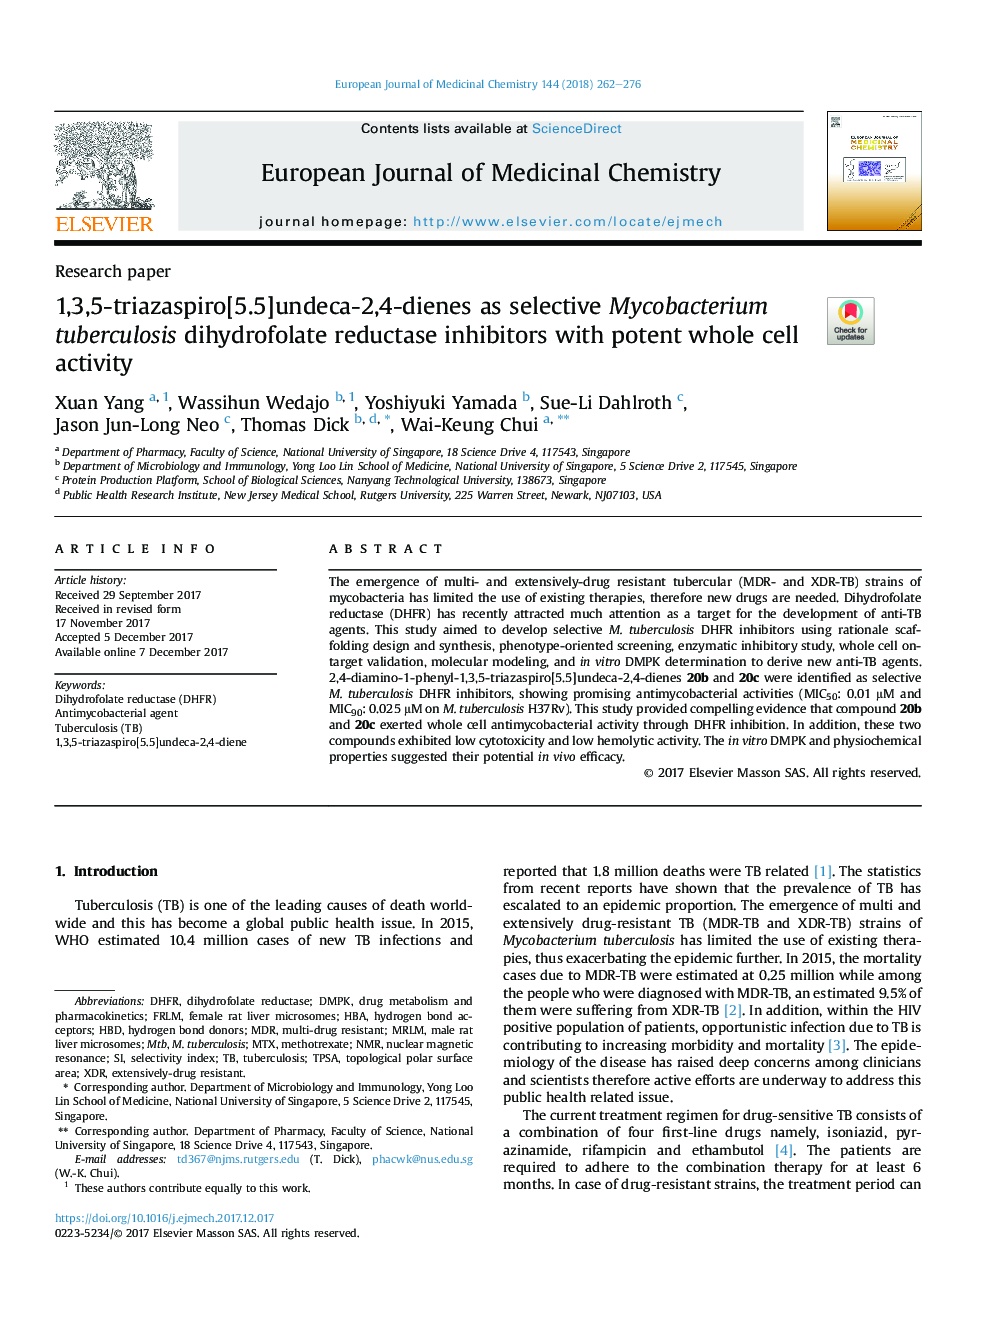 1,3,5-triazaspiro[5.5]undeca-2,4-dienes as selective Mycobacterium tuberculosis dihydrofolate reductase inhibitors with potent whole cell activity